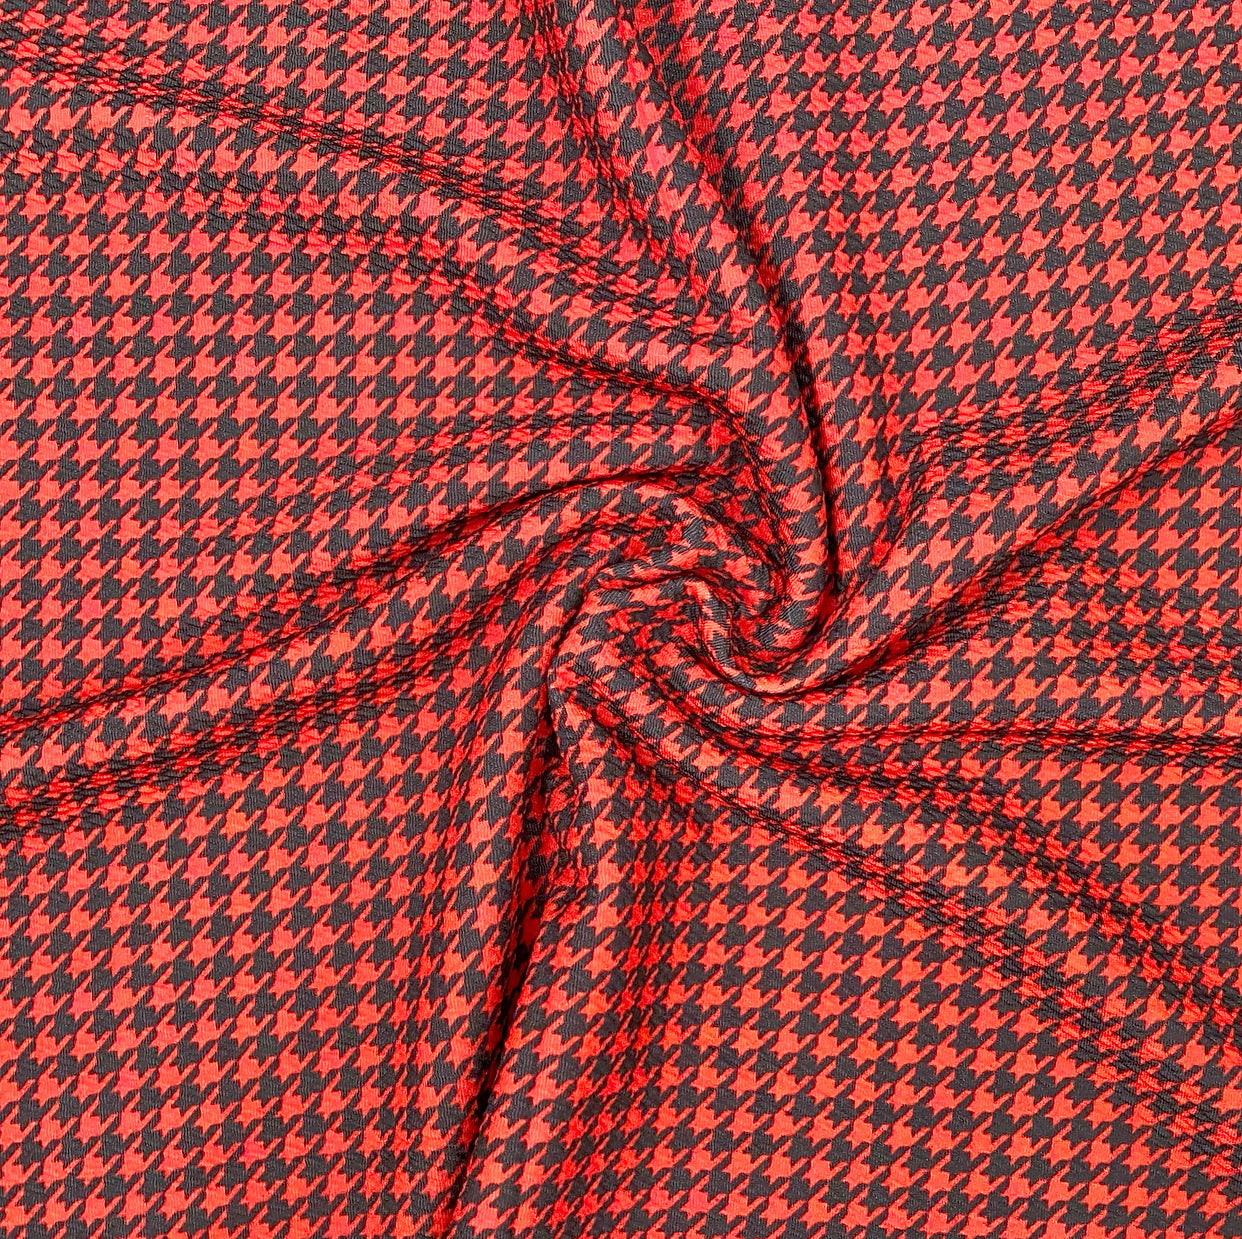 Red/Black Hounds tooth Premium Print Bullet Fabric